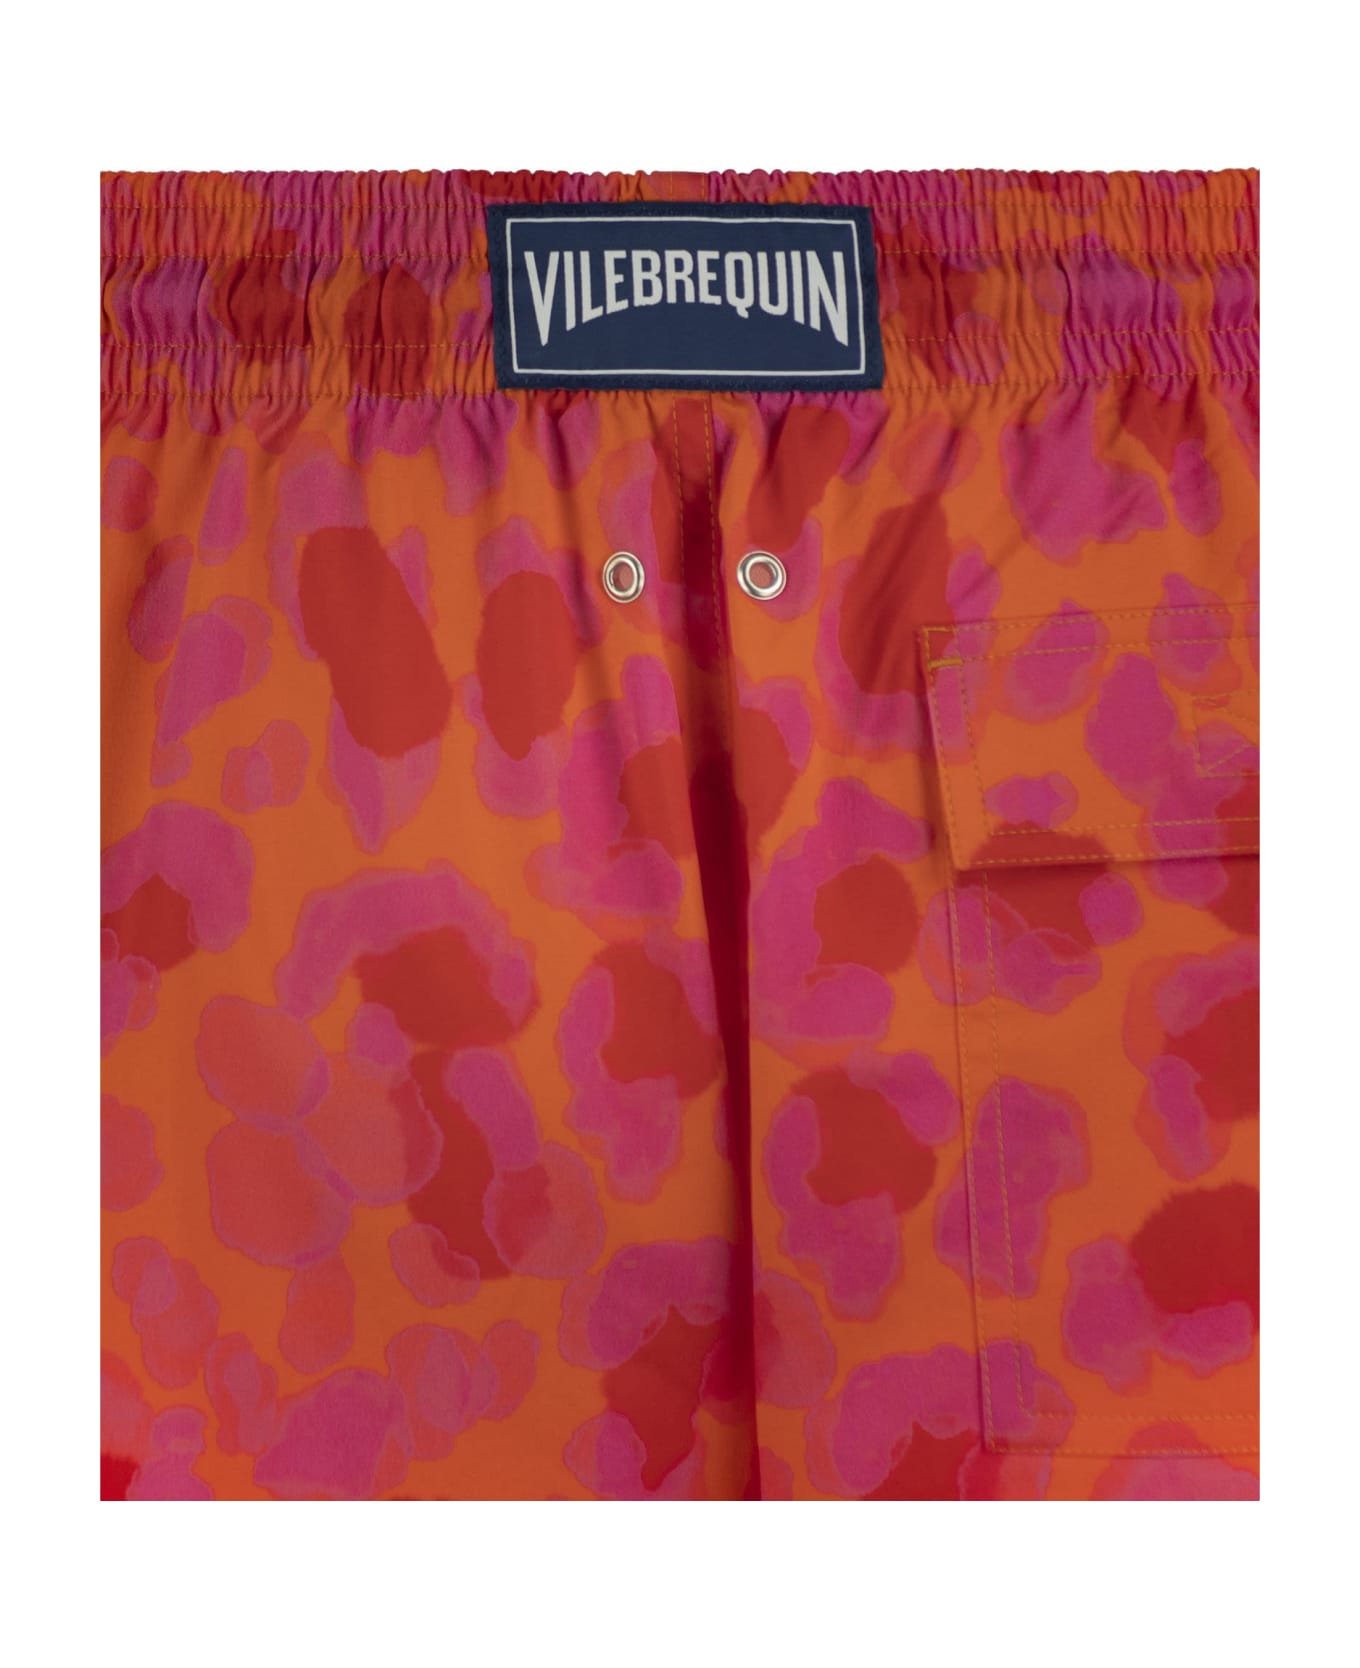 Vilebrequin Stretch Beach Shorts With Patterned Print - Orange